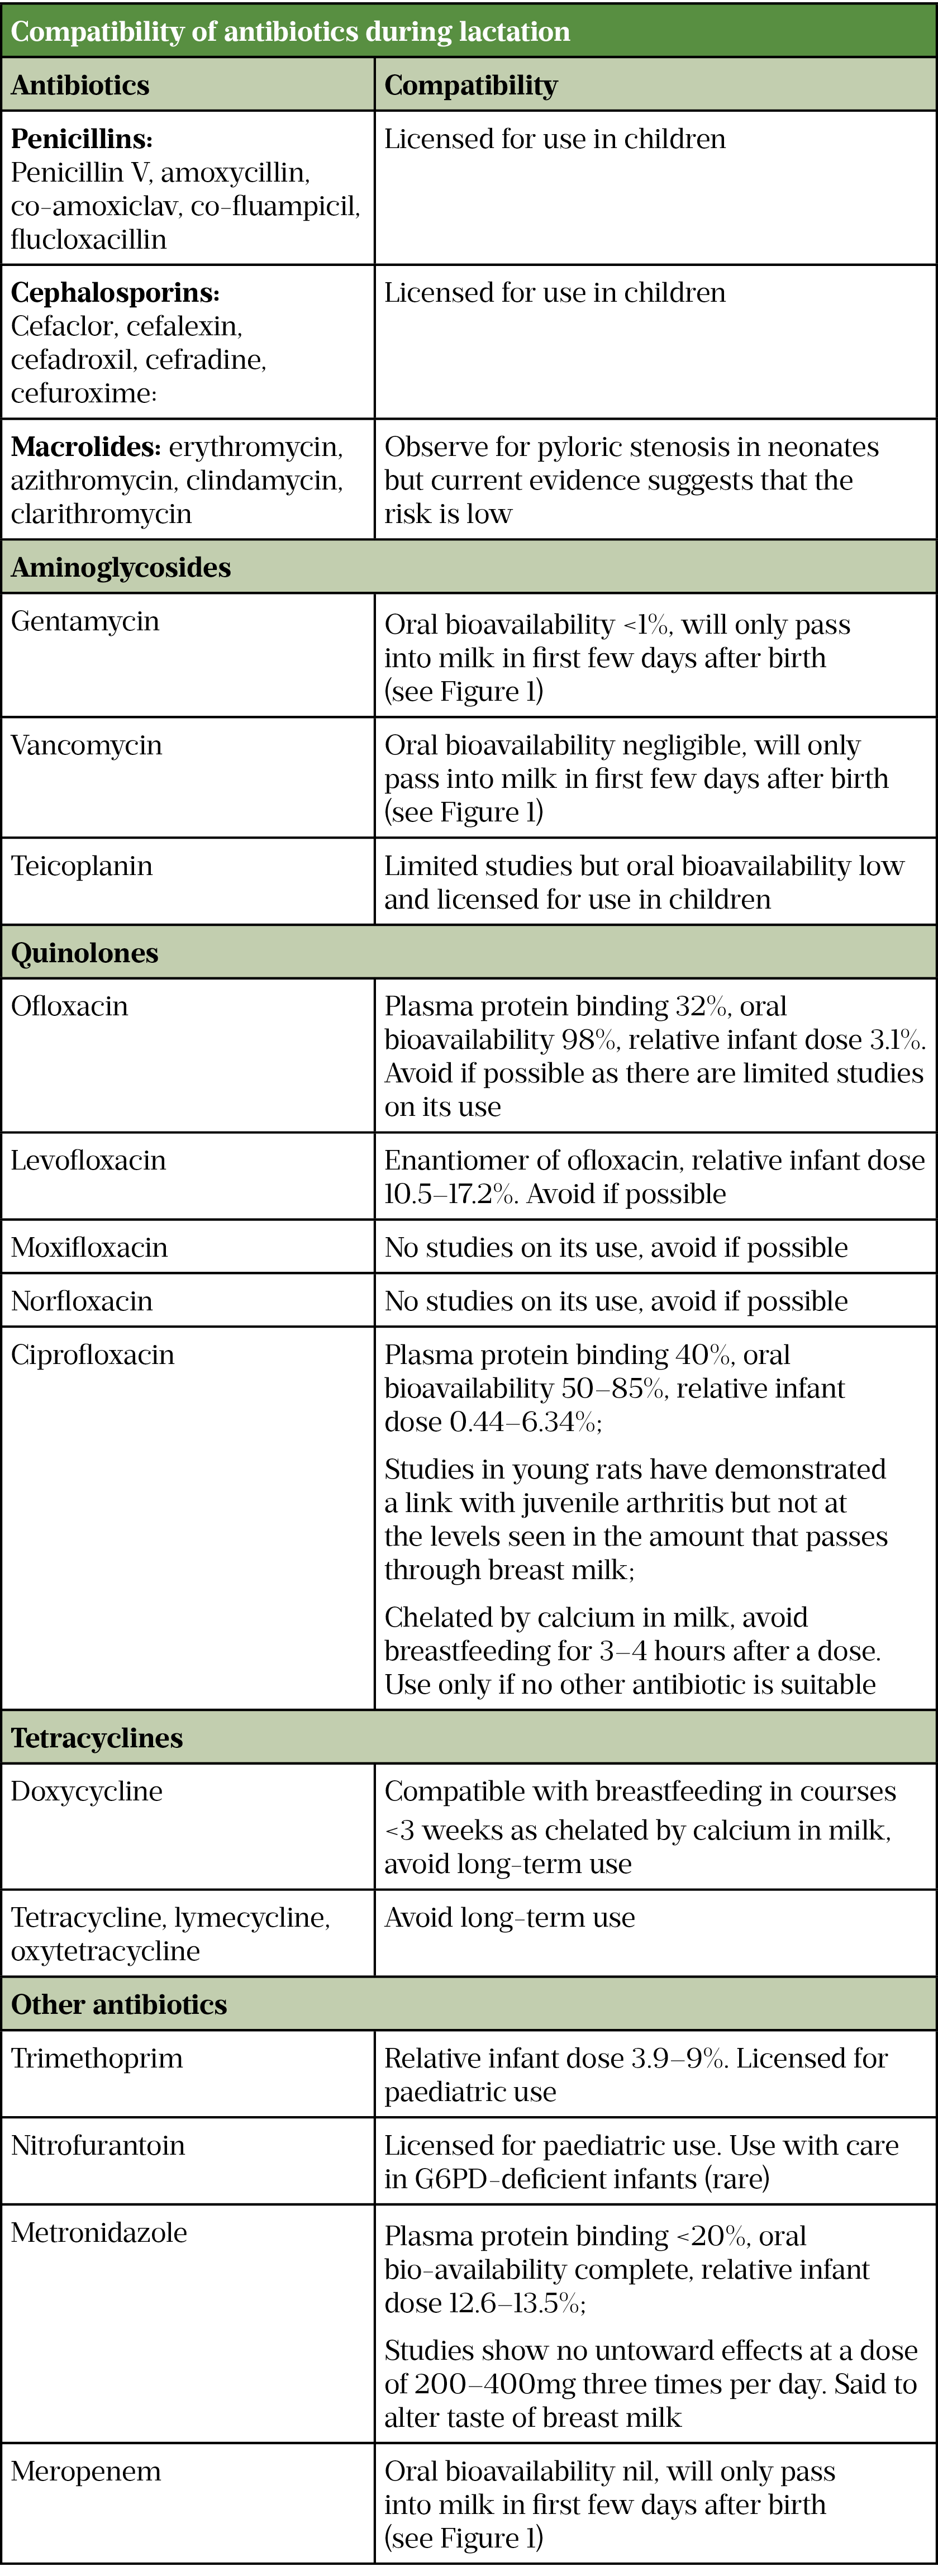 Table 2: Compatibility of antibiotics during lactation